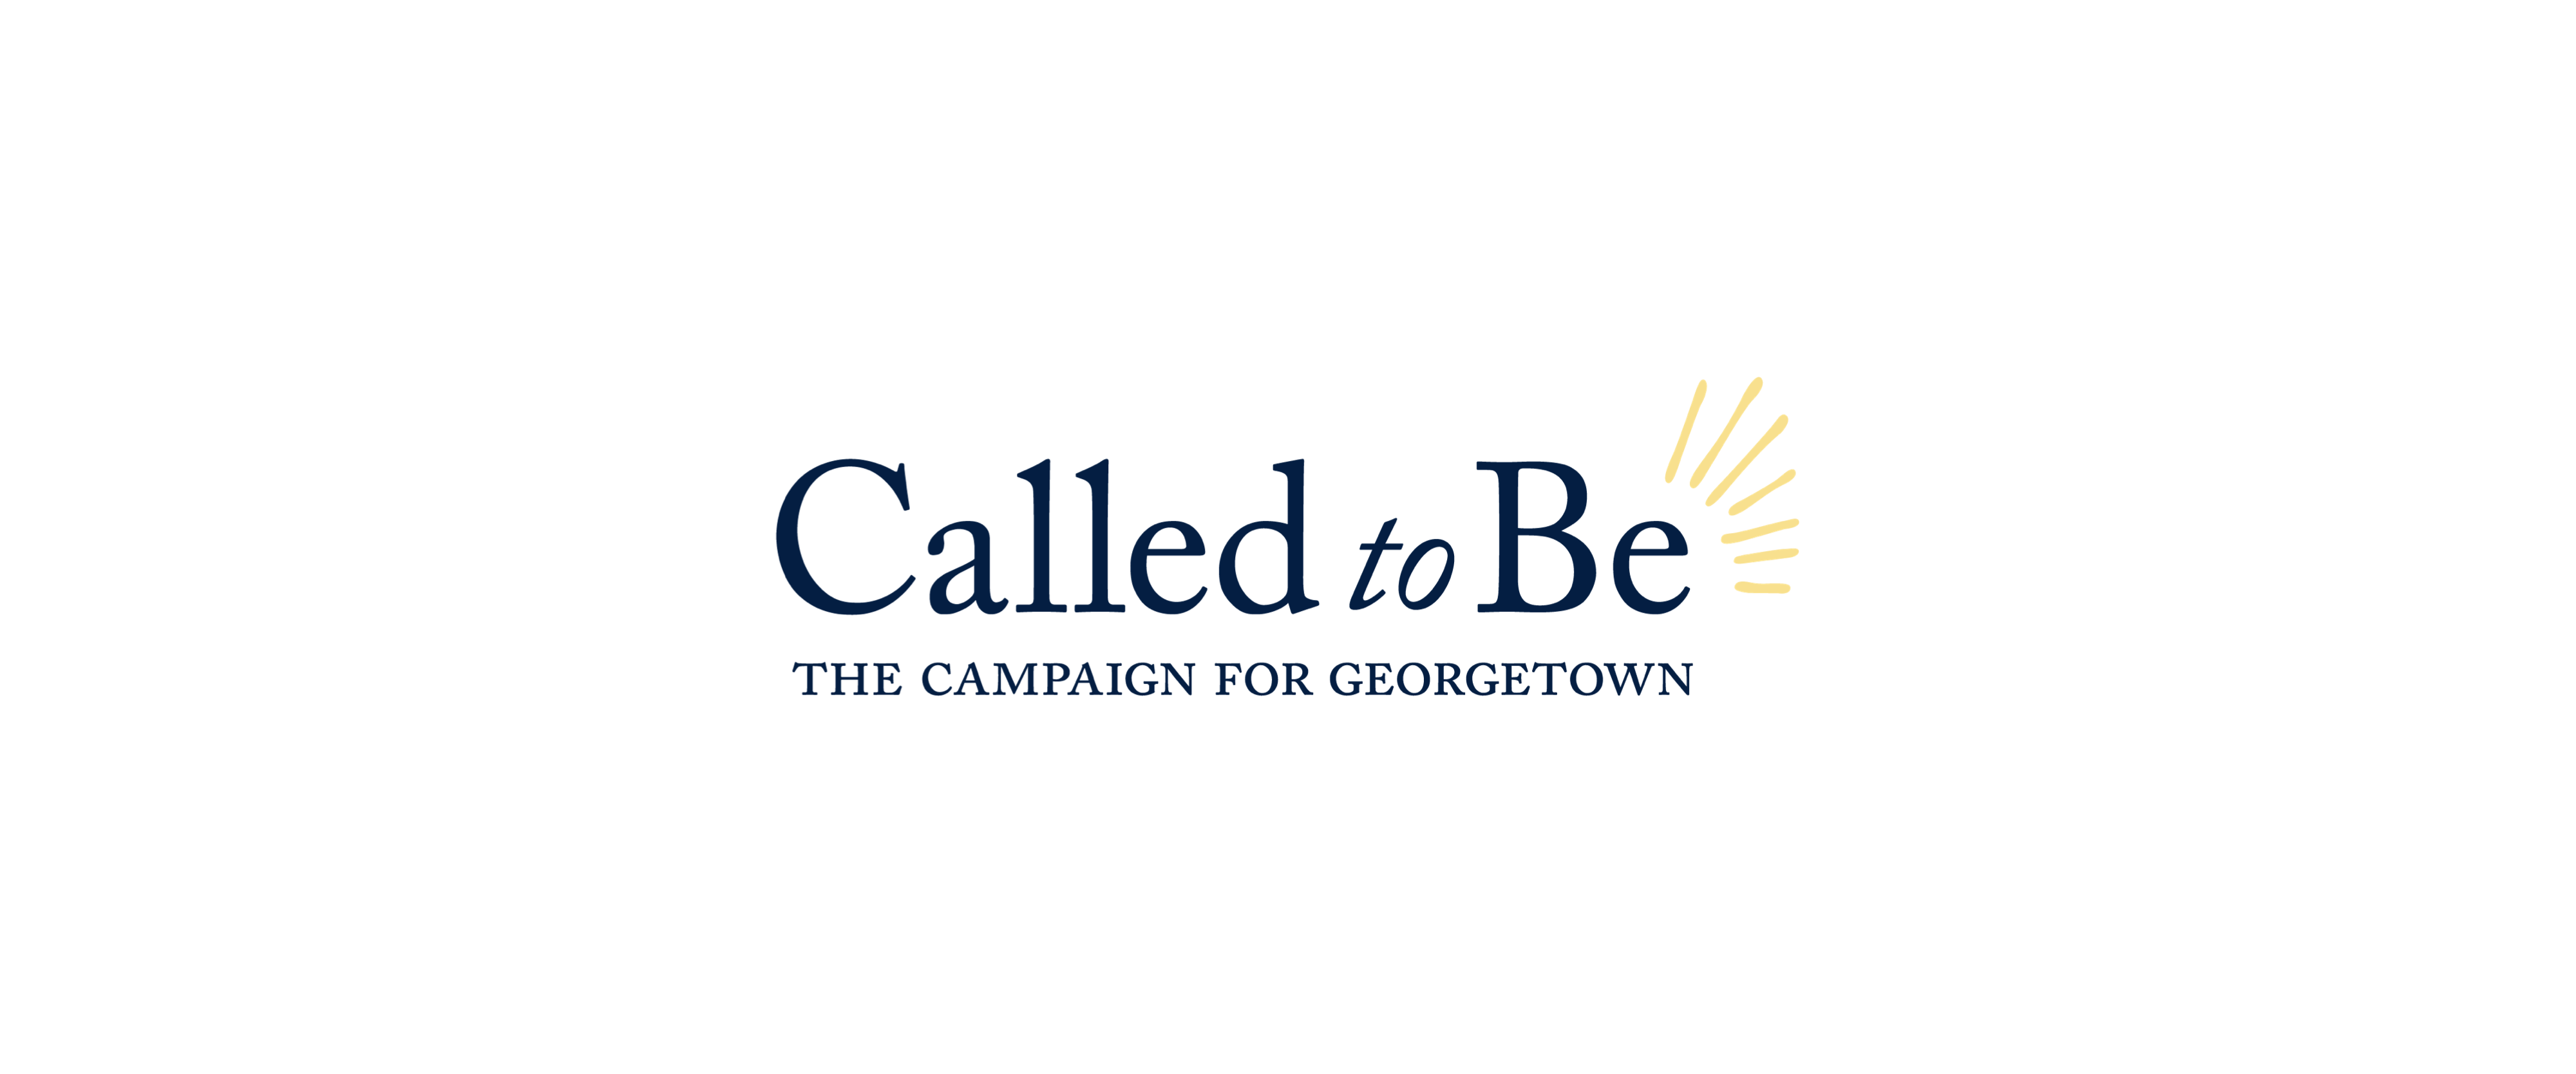 called to be the campaign for georgetown